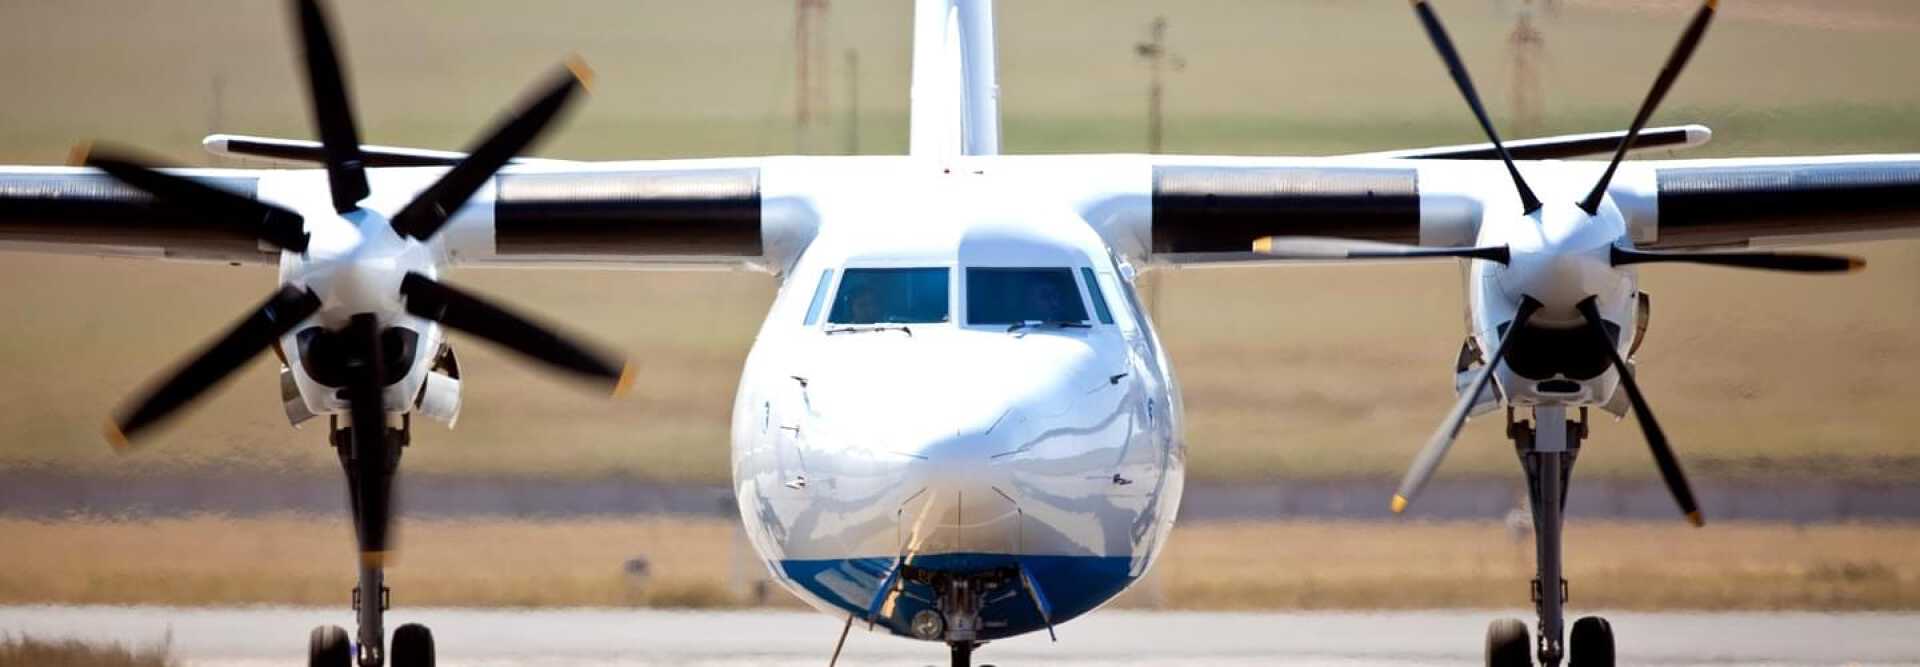 Turboprop Airliner Fokker 50 to charter for private aviation flights with LunaJets  for excellent reliability and durability, comfortable service